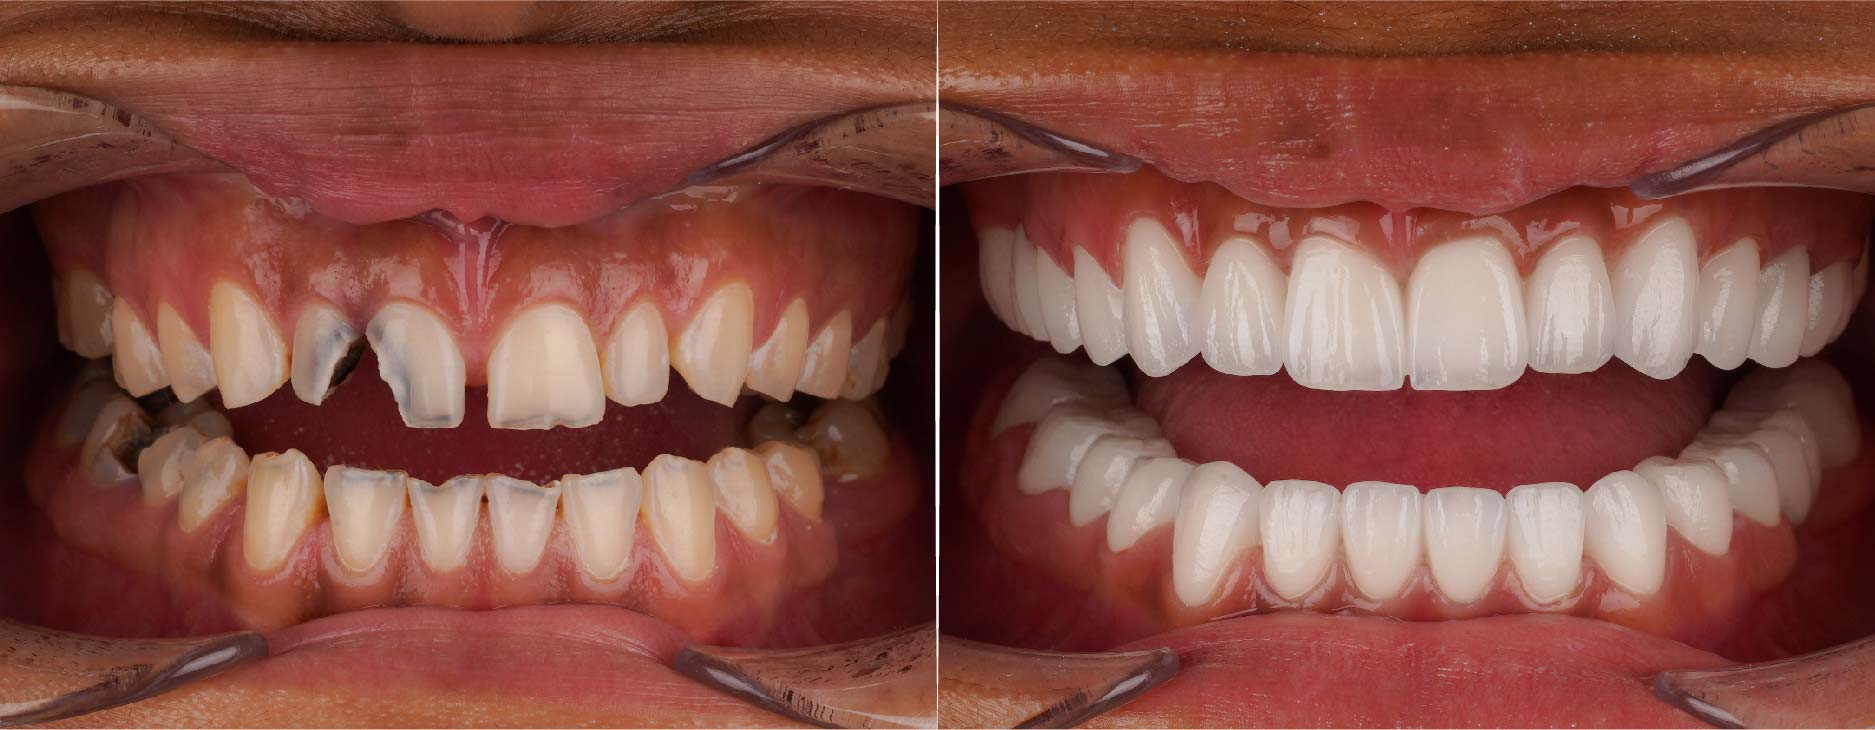 Chipped front teeth before after- Dentakay